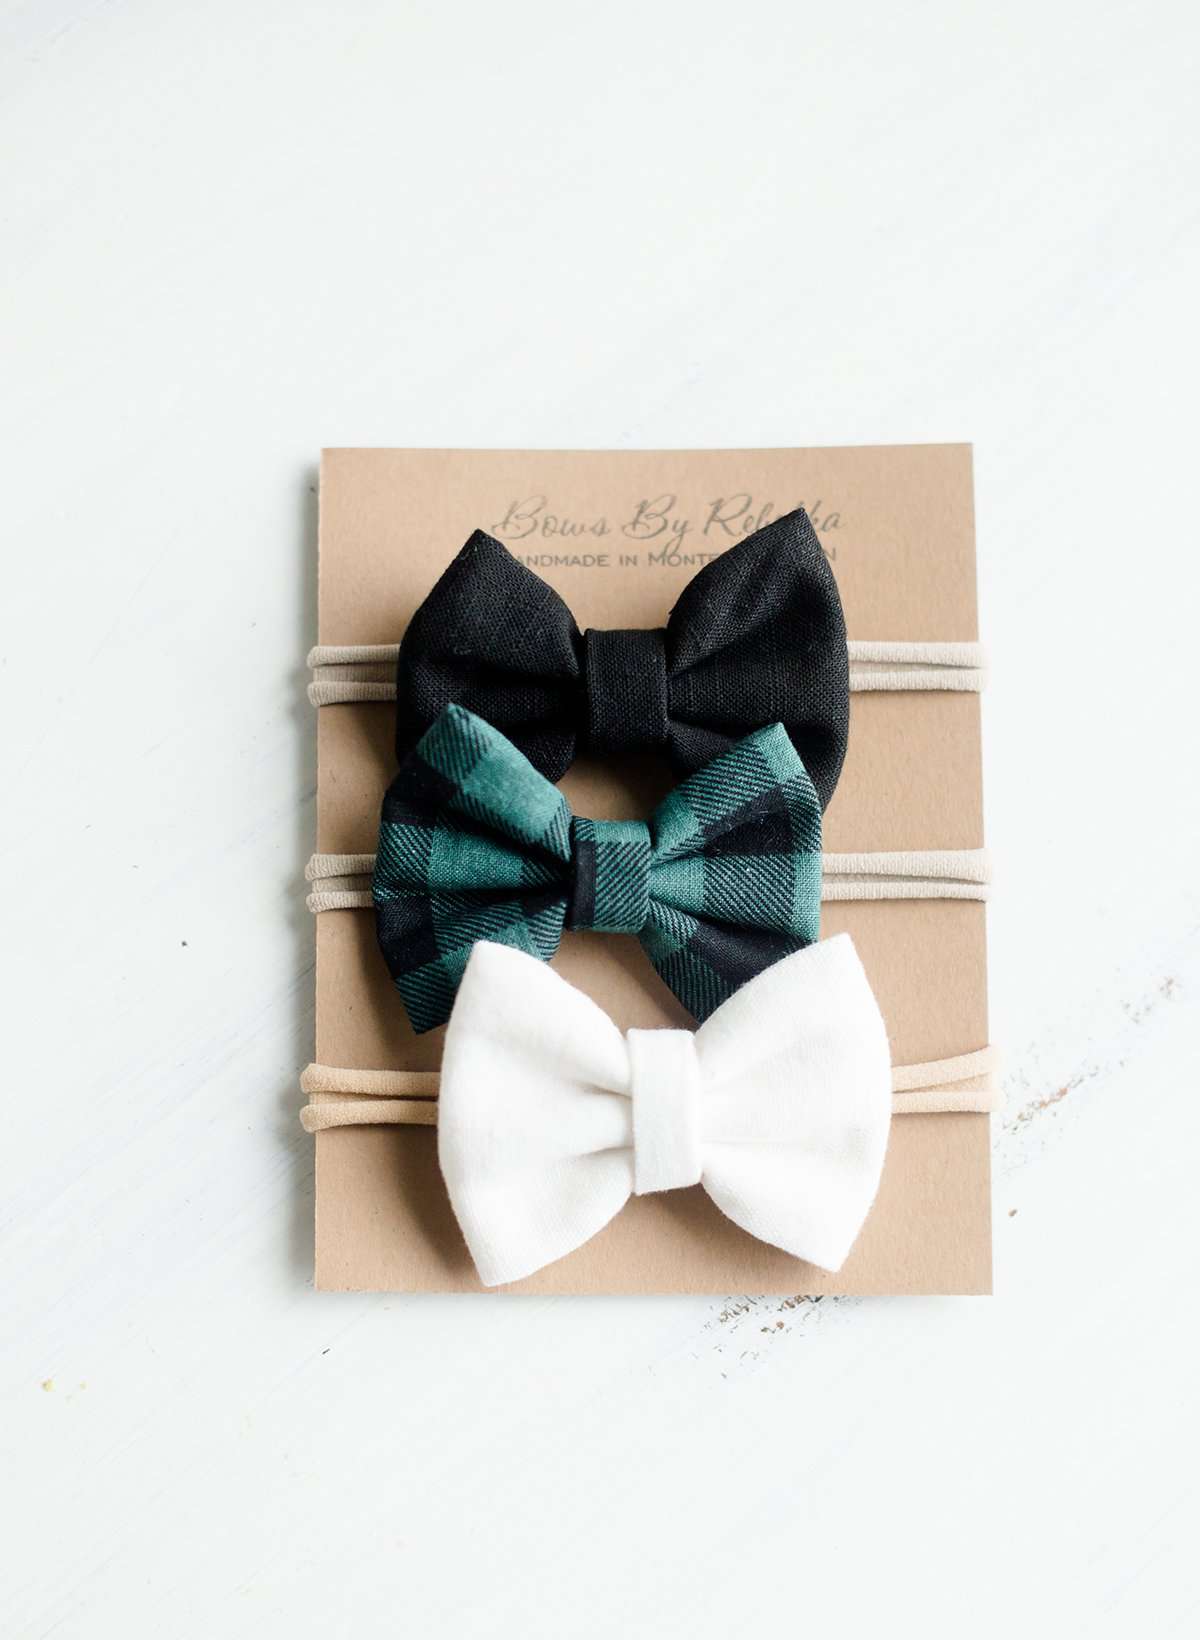 Little girls hair bow set of three. This shows a white, black and green buffalo check headband or alligator clip bow.